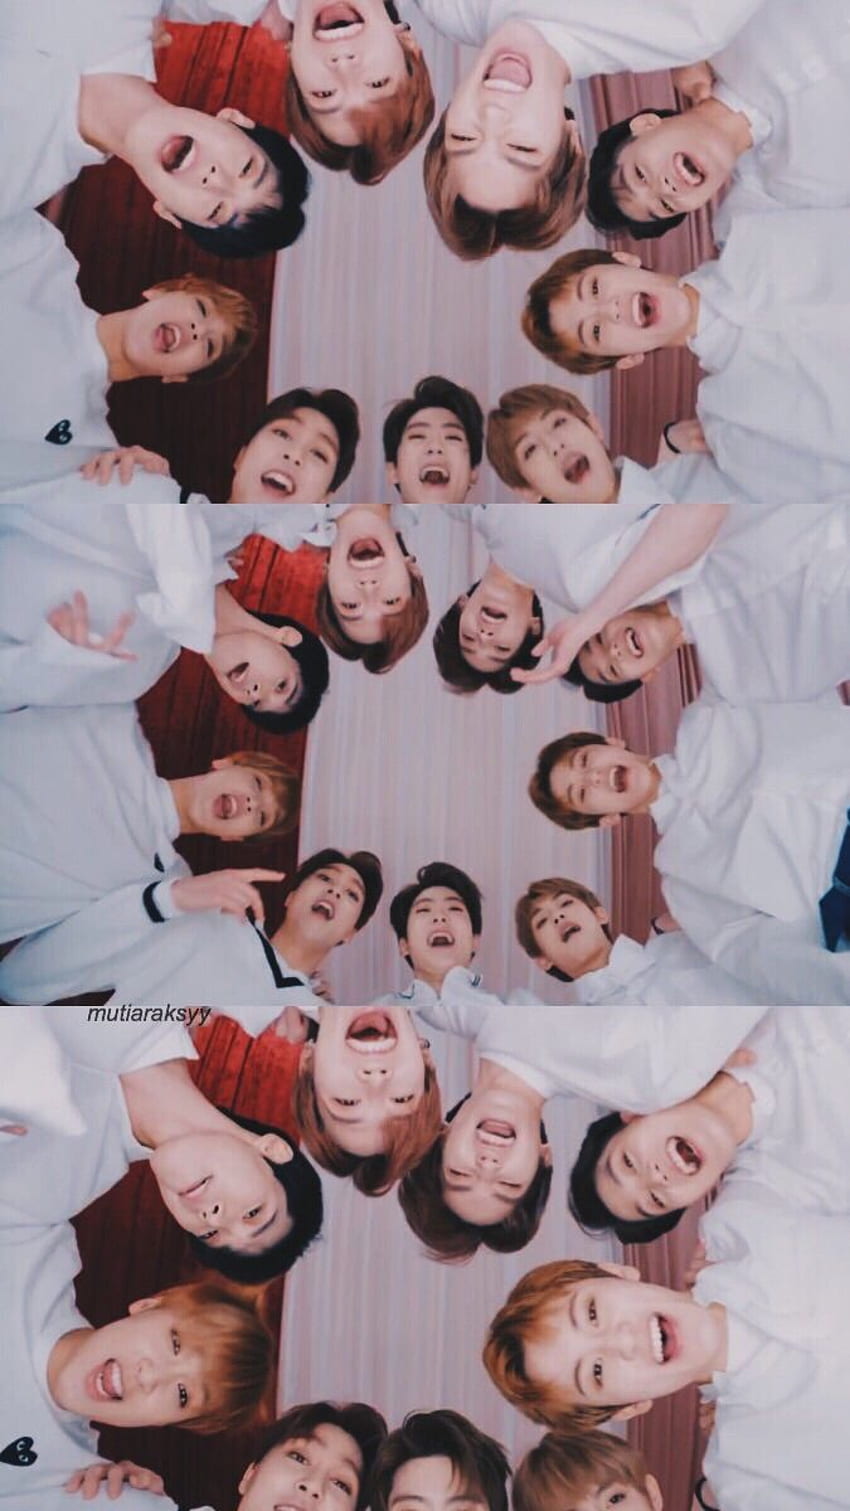 𝐧𝐜𝐭¹²⁷  𝐣𝐚𝐞𝐡𝐲𝐮𝐧 on Twitter  nct 127 wallpapers  cr me nct  127  touch  nct127 nct127touch nctwallpaper kpop   httpstcoHiNUeq7JzZ  Twitter